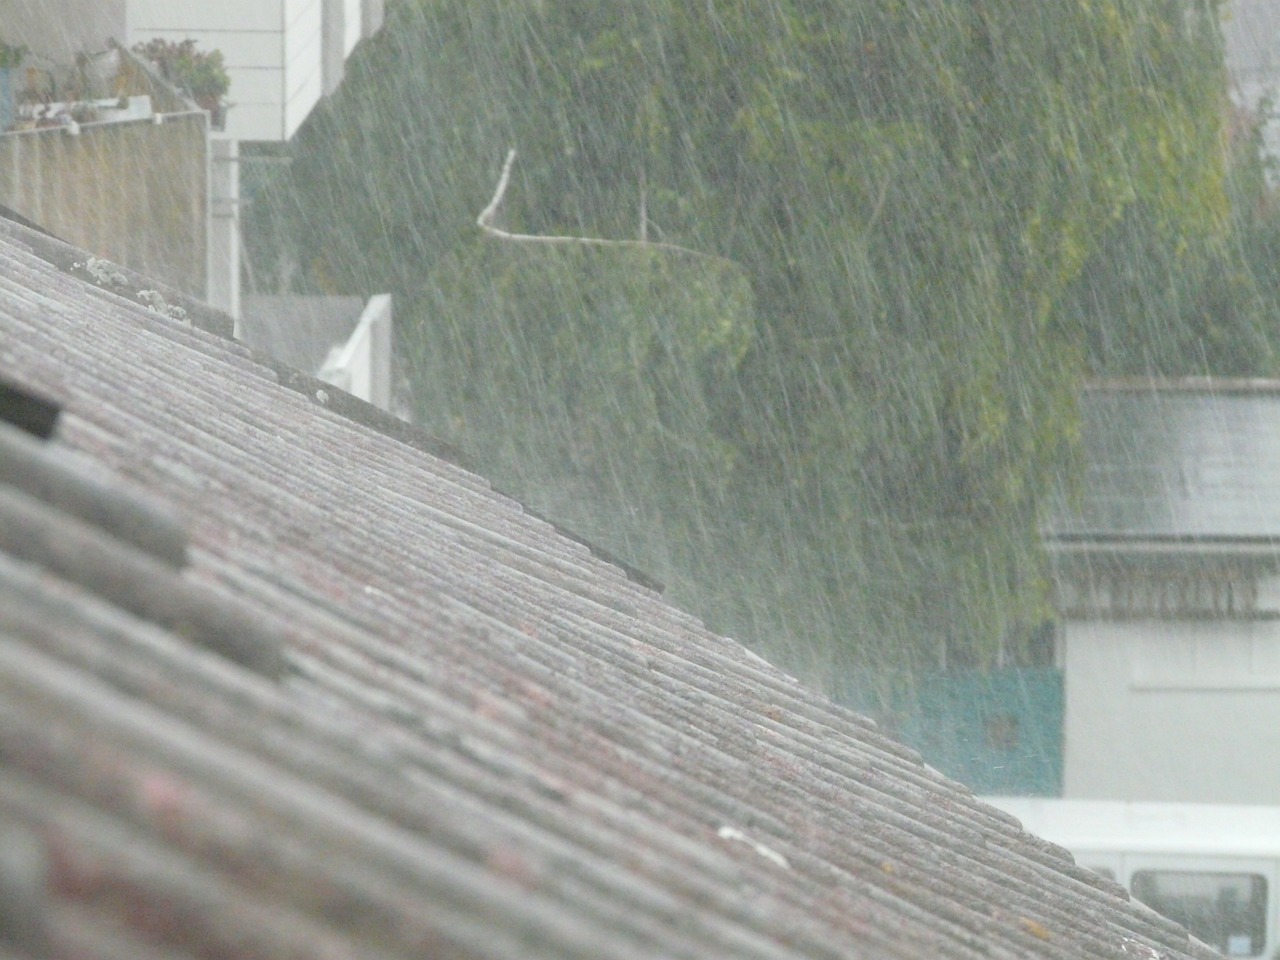 downpour roof shiver free photo